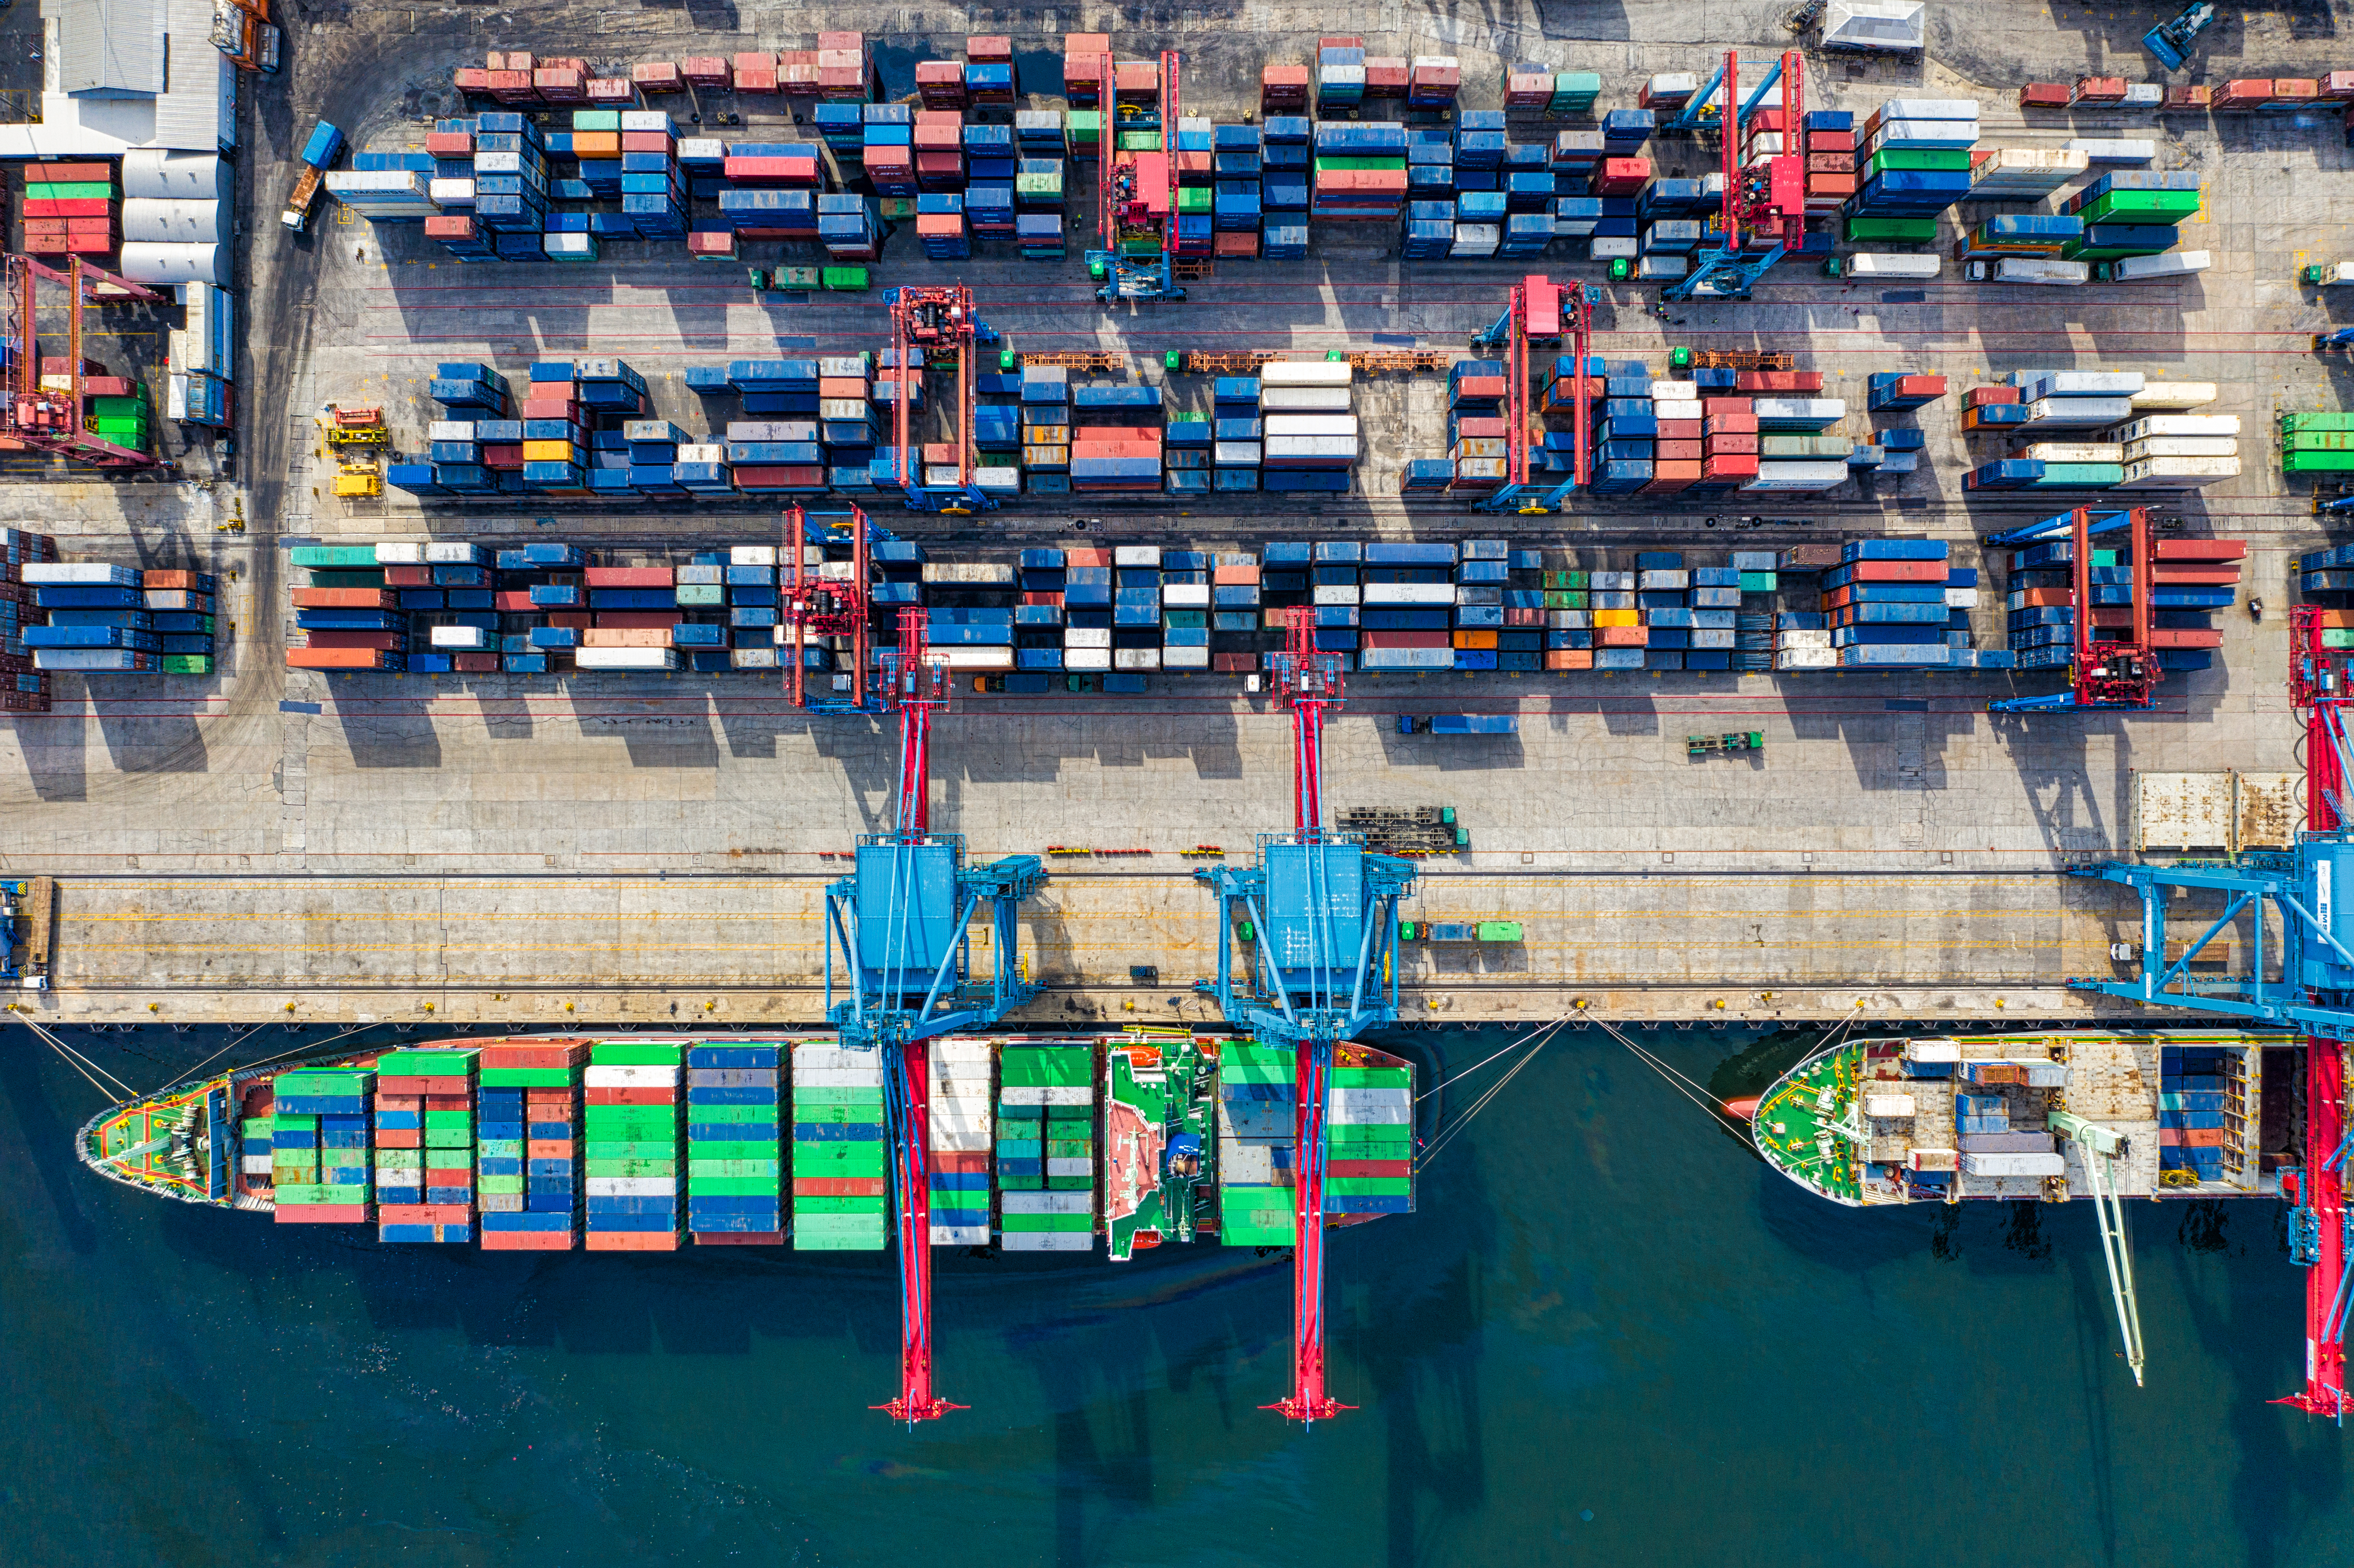 Canva-Birds-eye-View-Photo-of-Freight-Containers